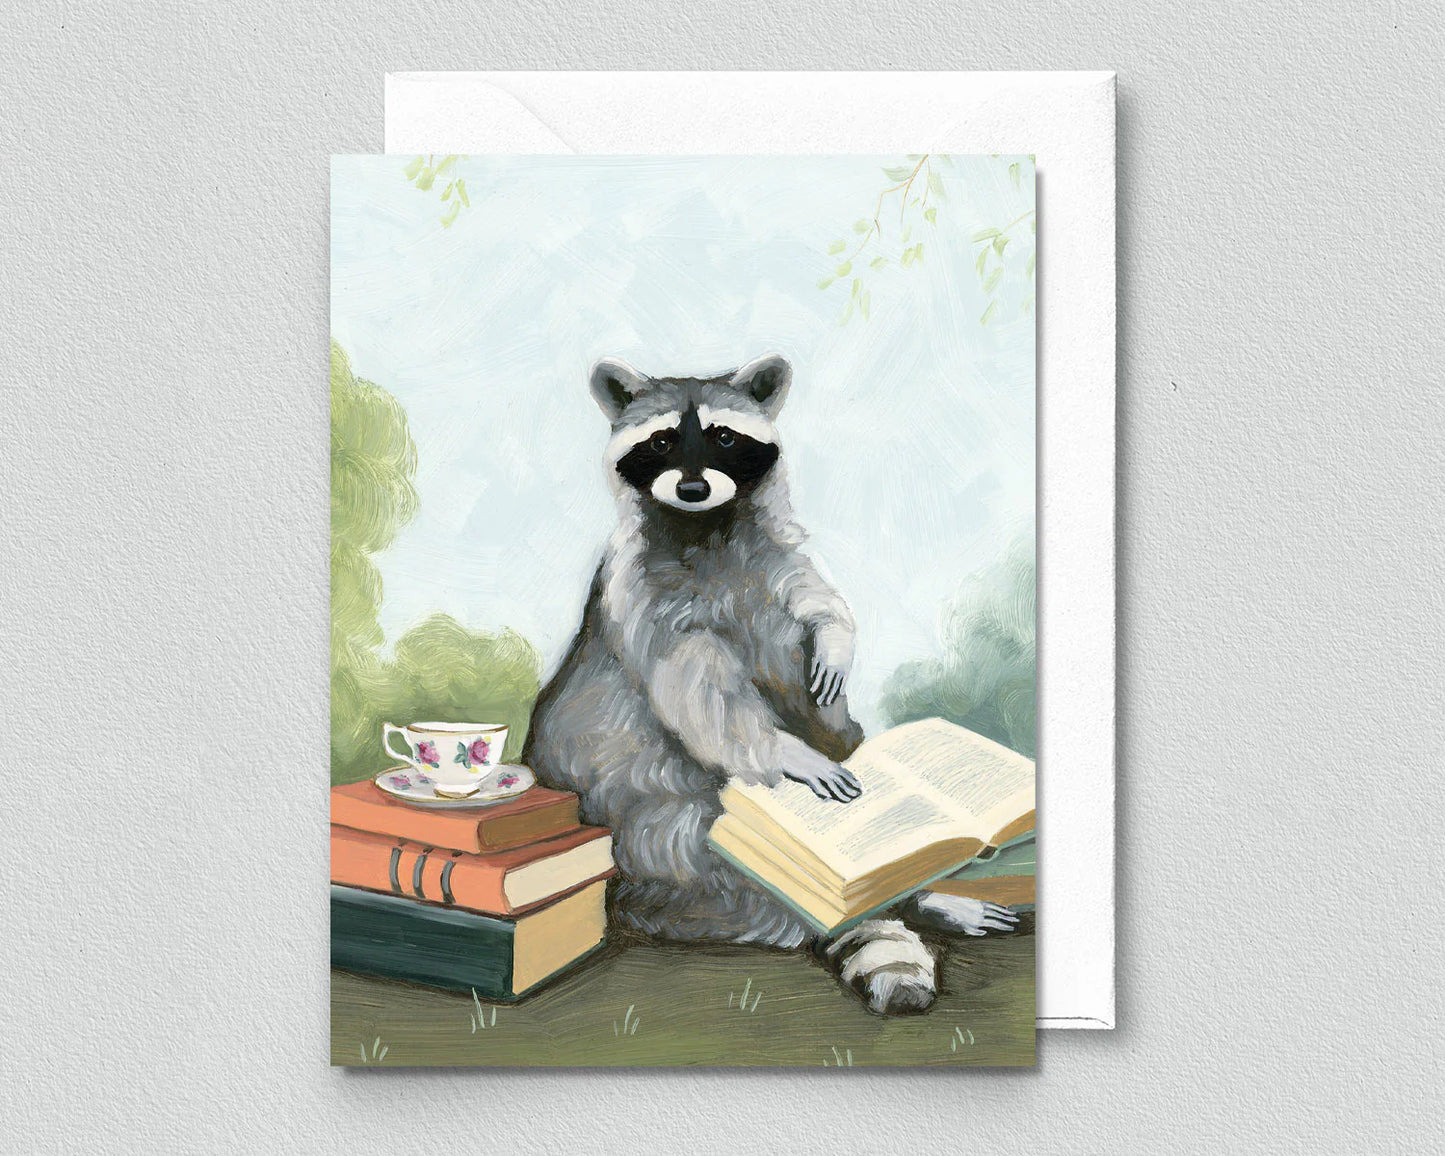 Raccoon with Tea and Books Greeting Card (blank inside) by Kim Ferreira (Joie de Vivre)